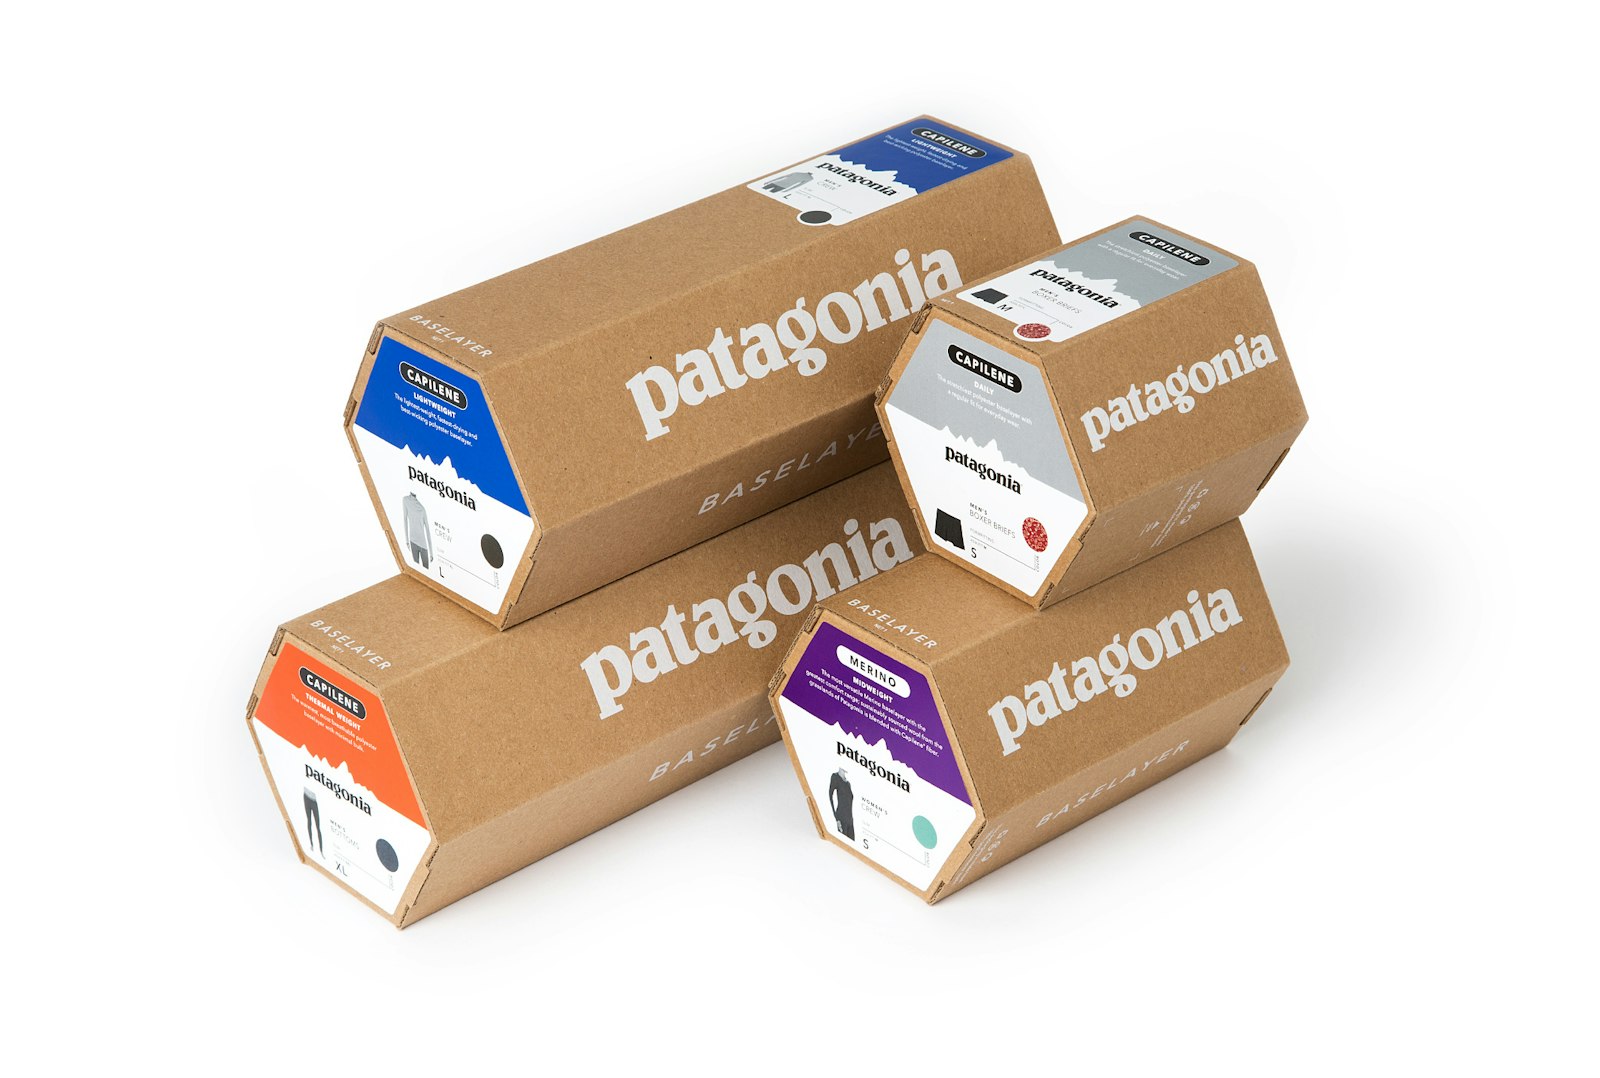 The Patagonia brand packaging design with craft octagon box and white labels.